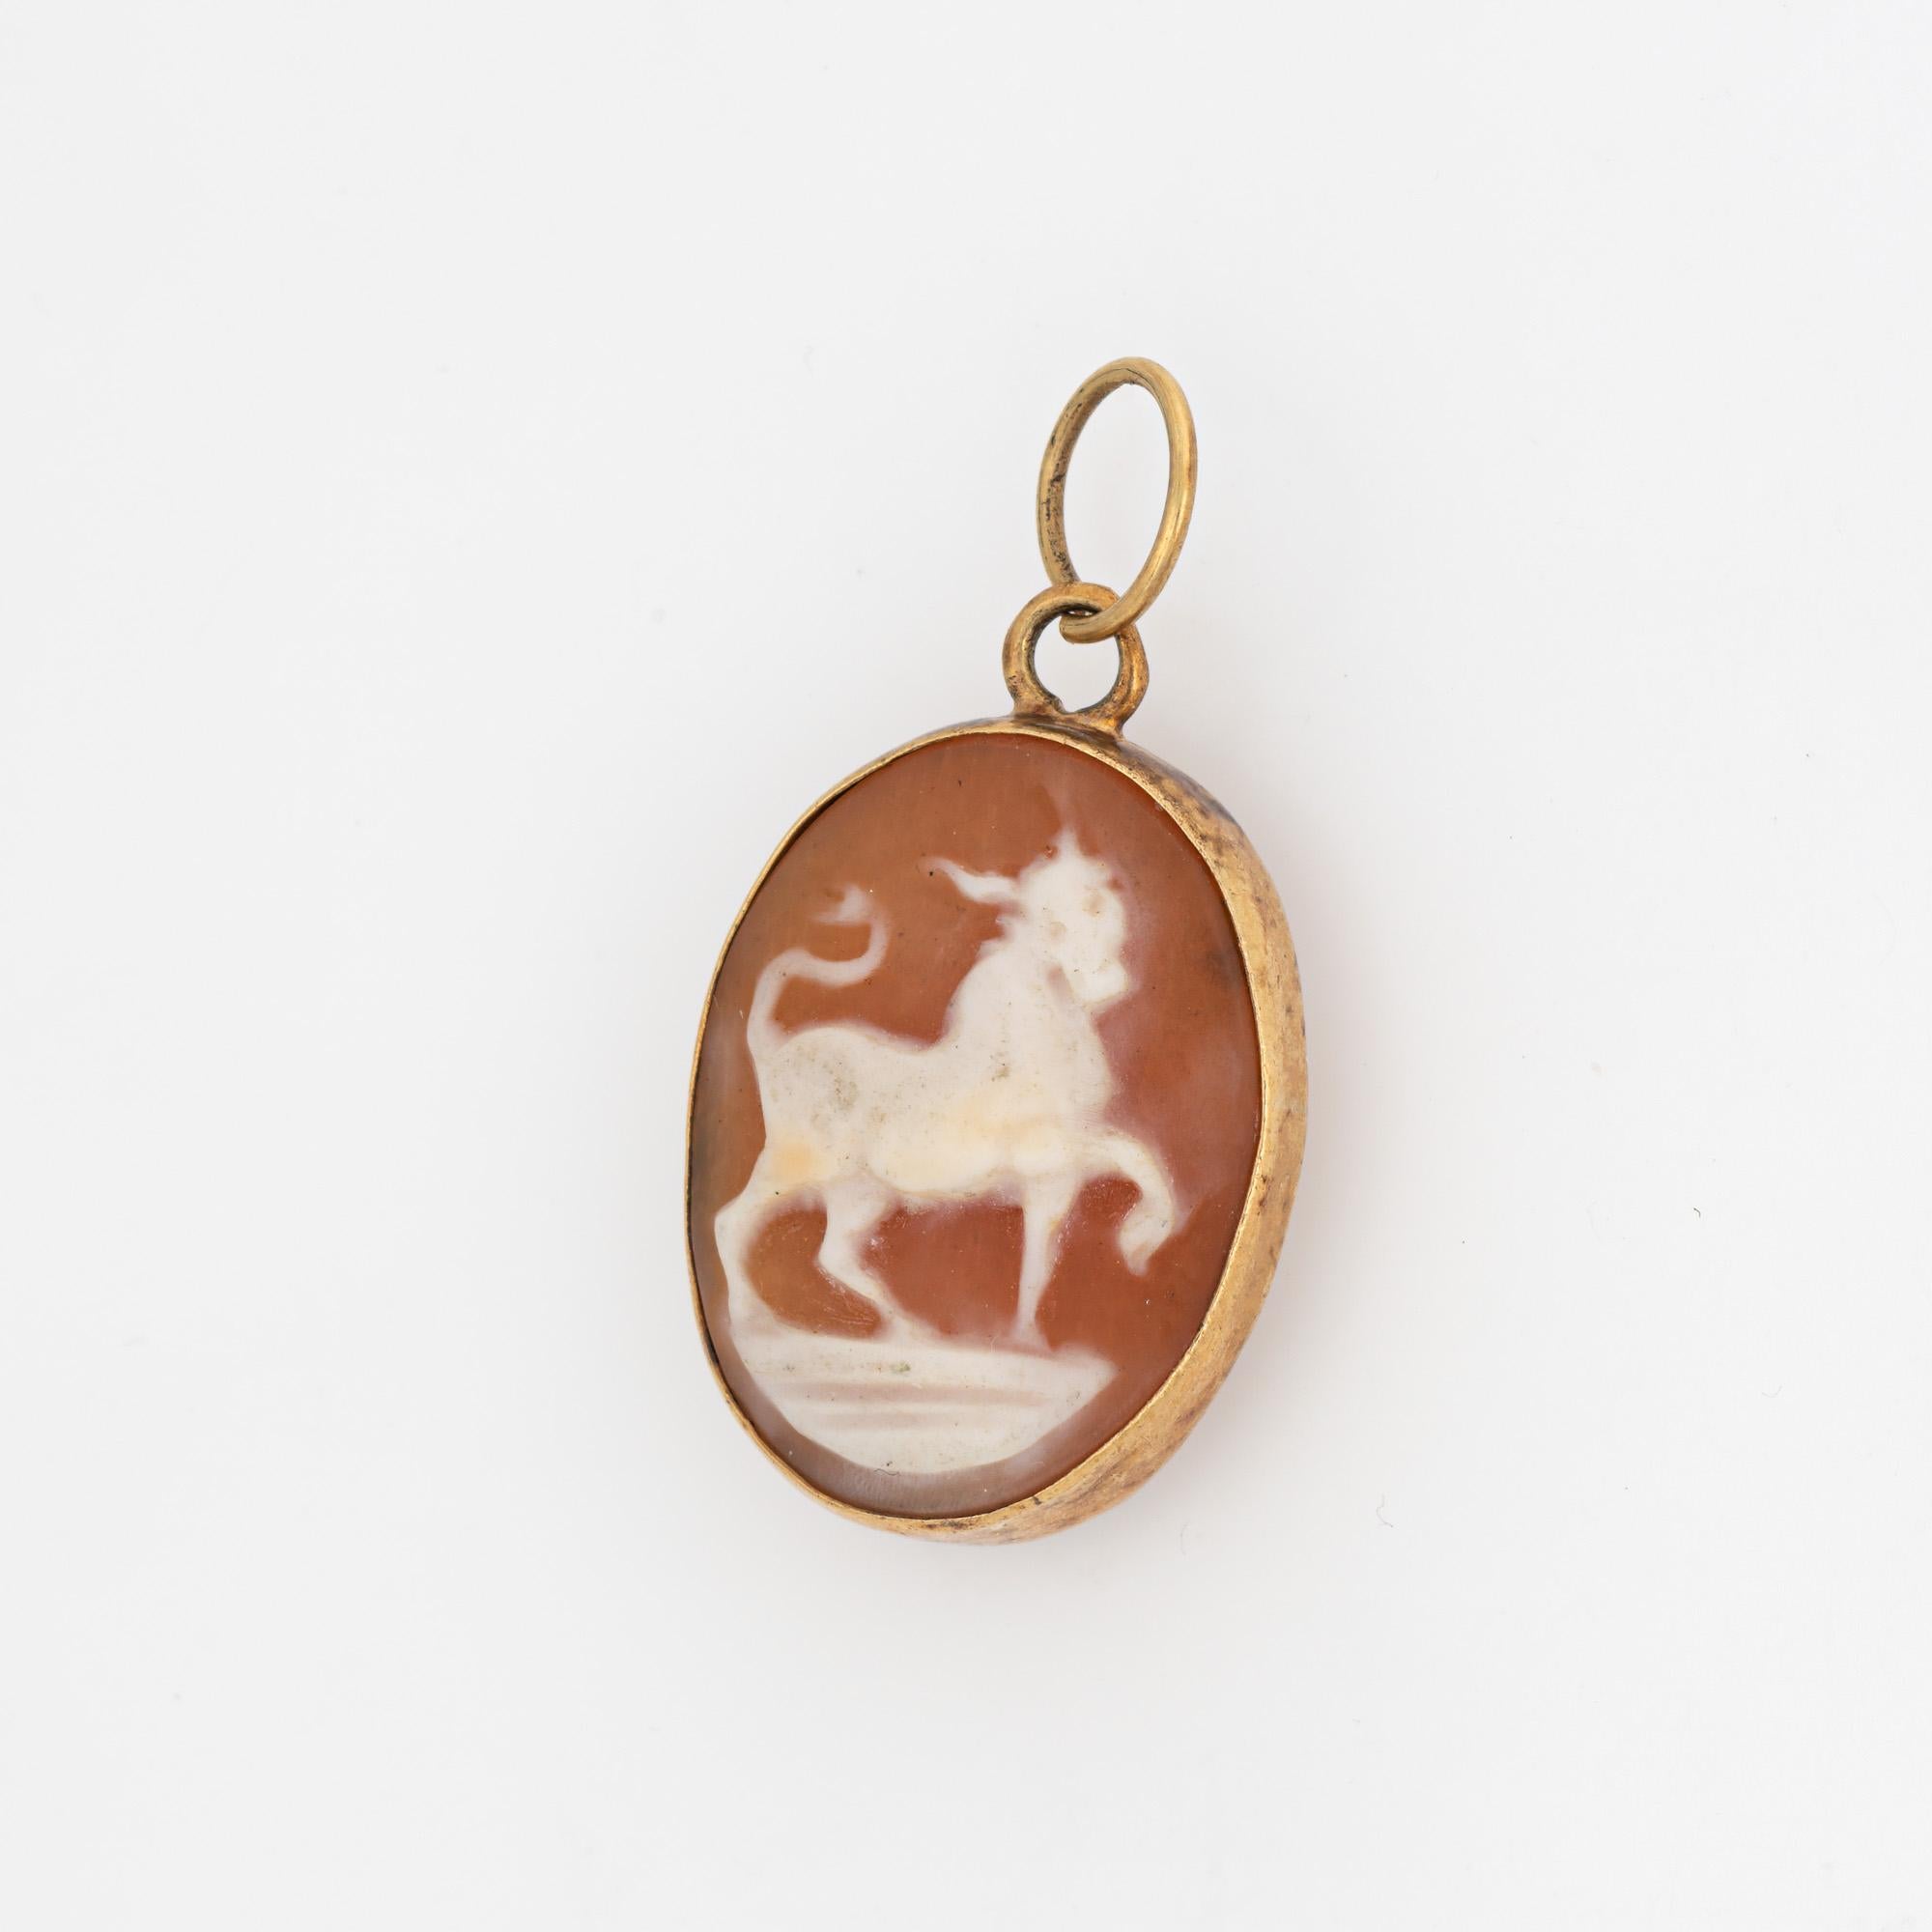 Modern Vintage Cameo Pendant Double Sided 14k Yellow Gold The Three Graces Animal